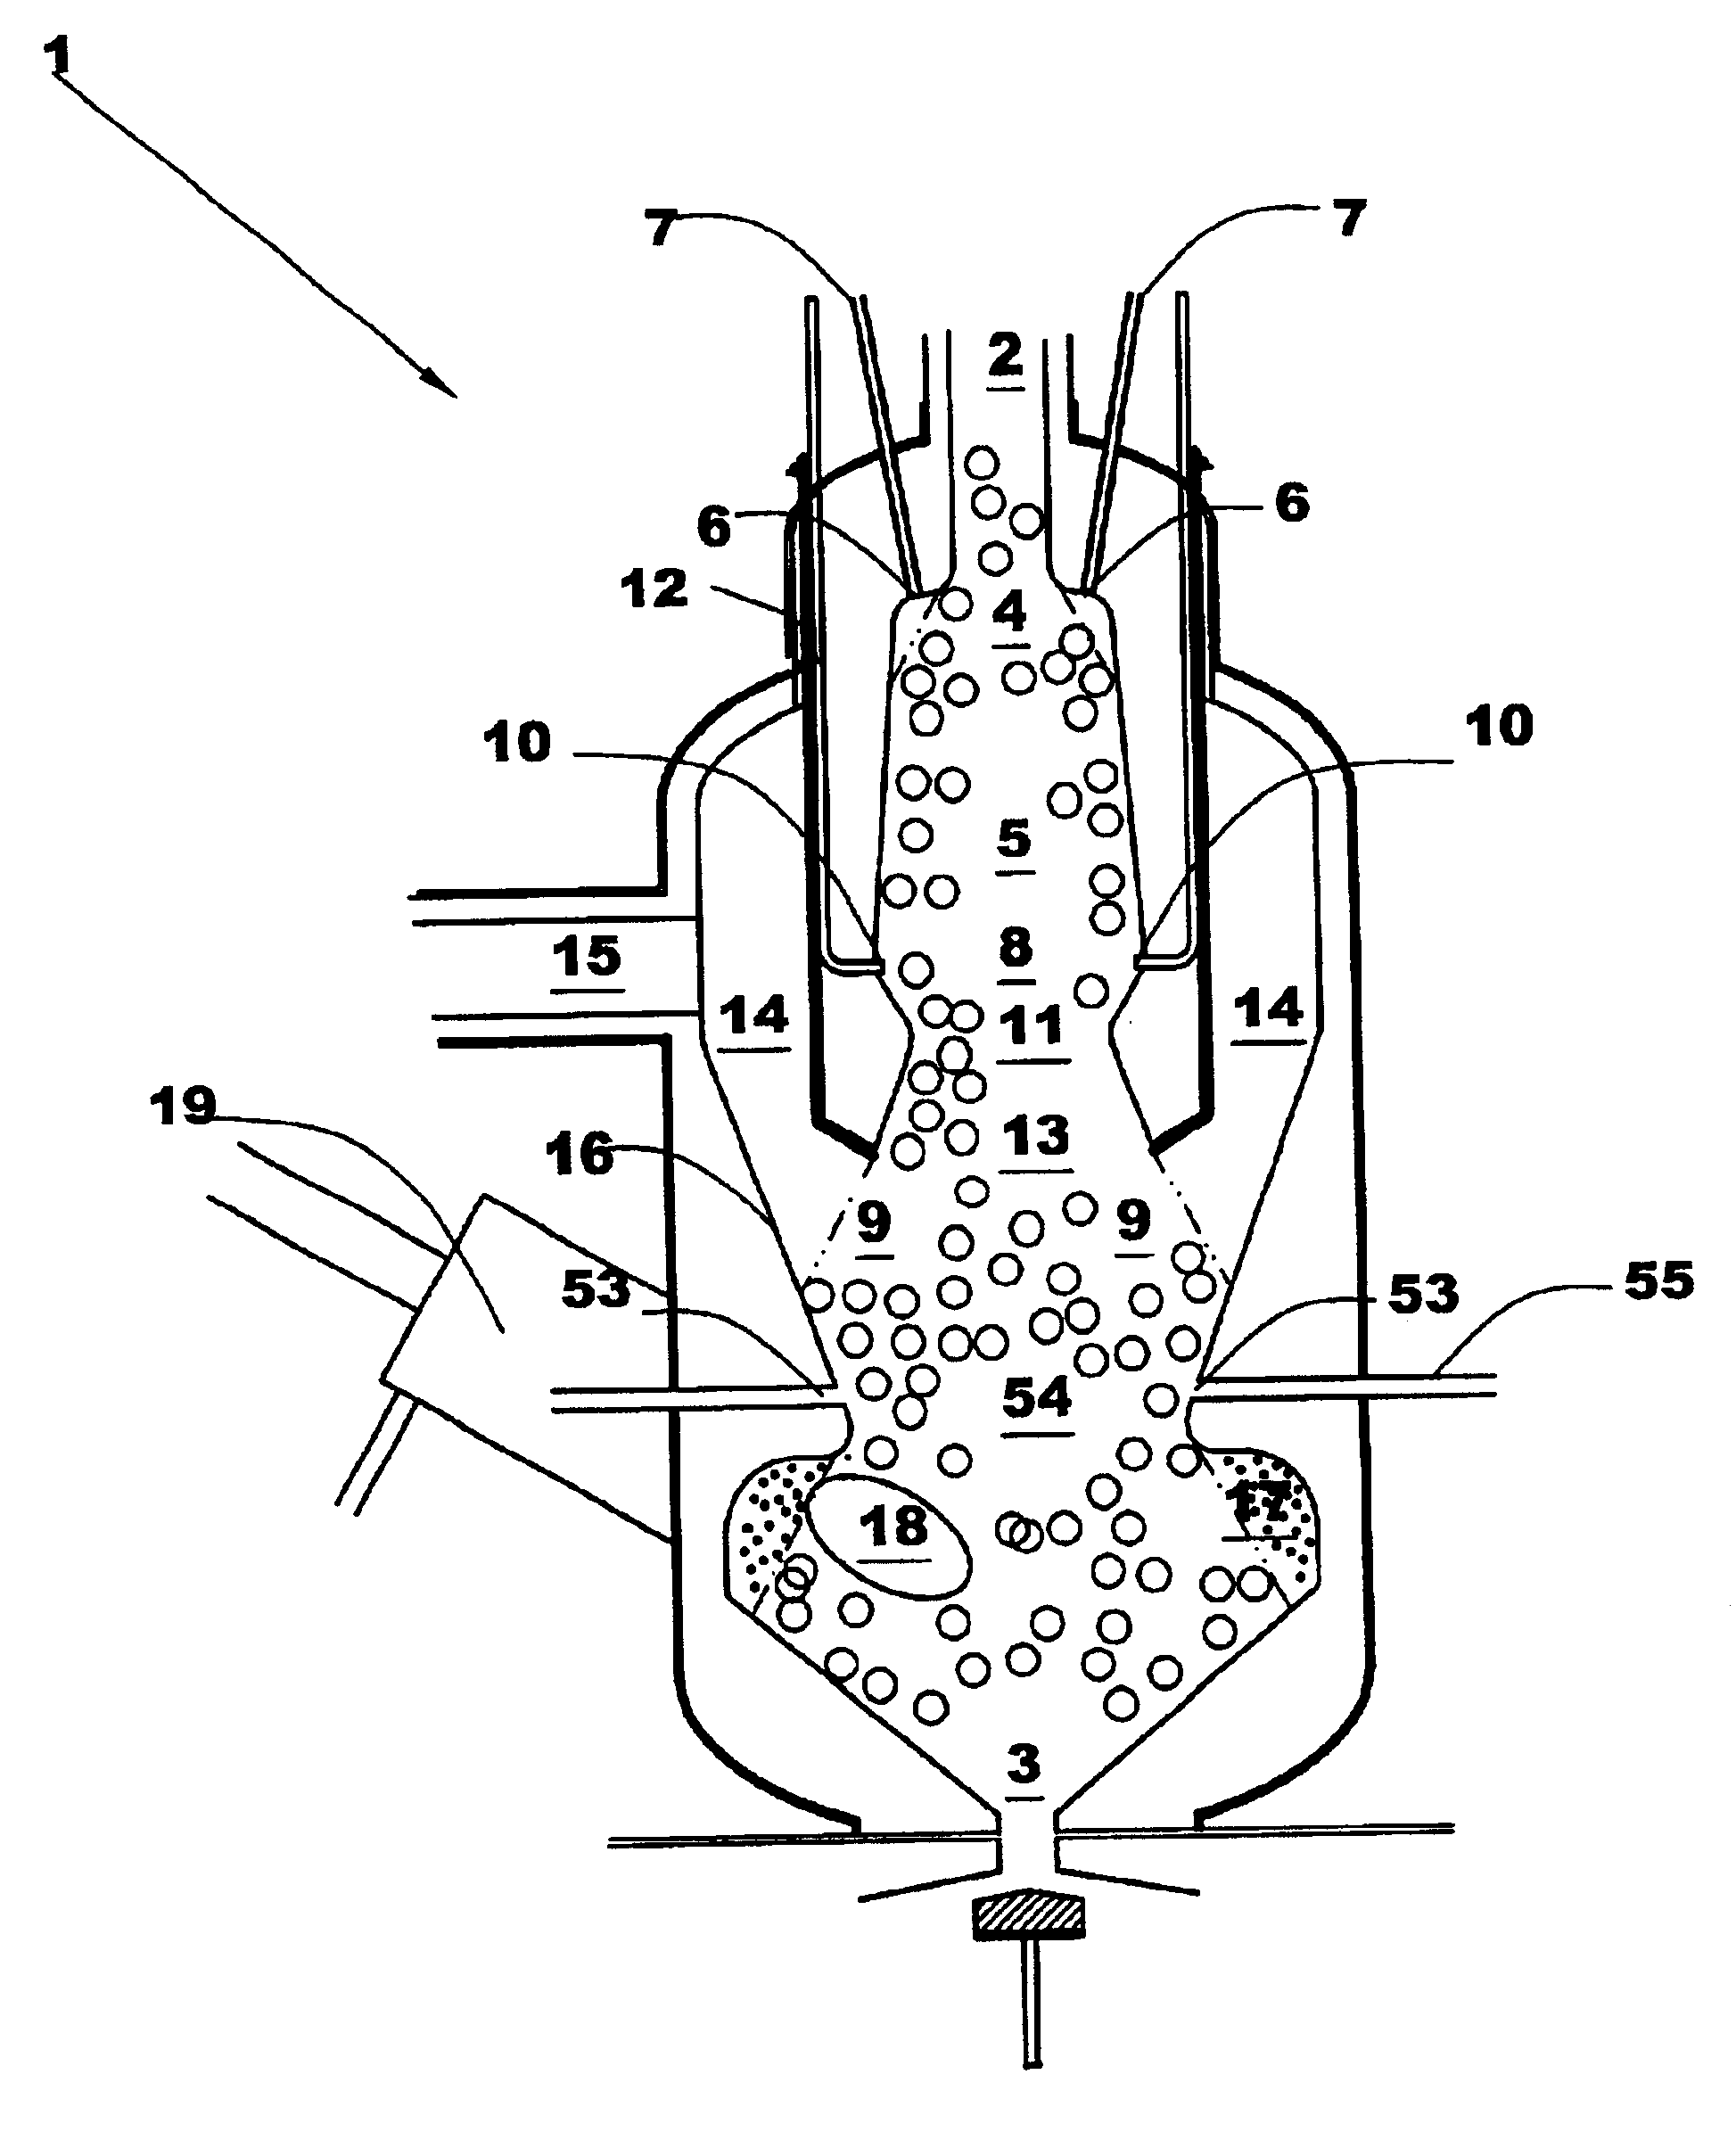 Multi-faceted gasifier and related methods